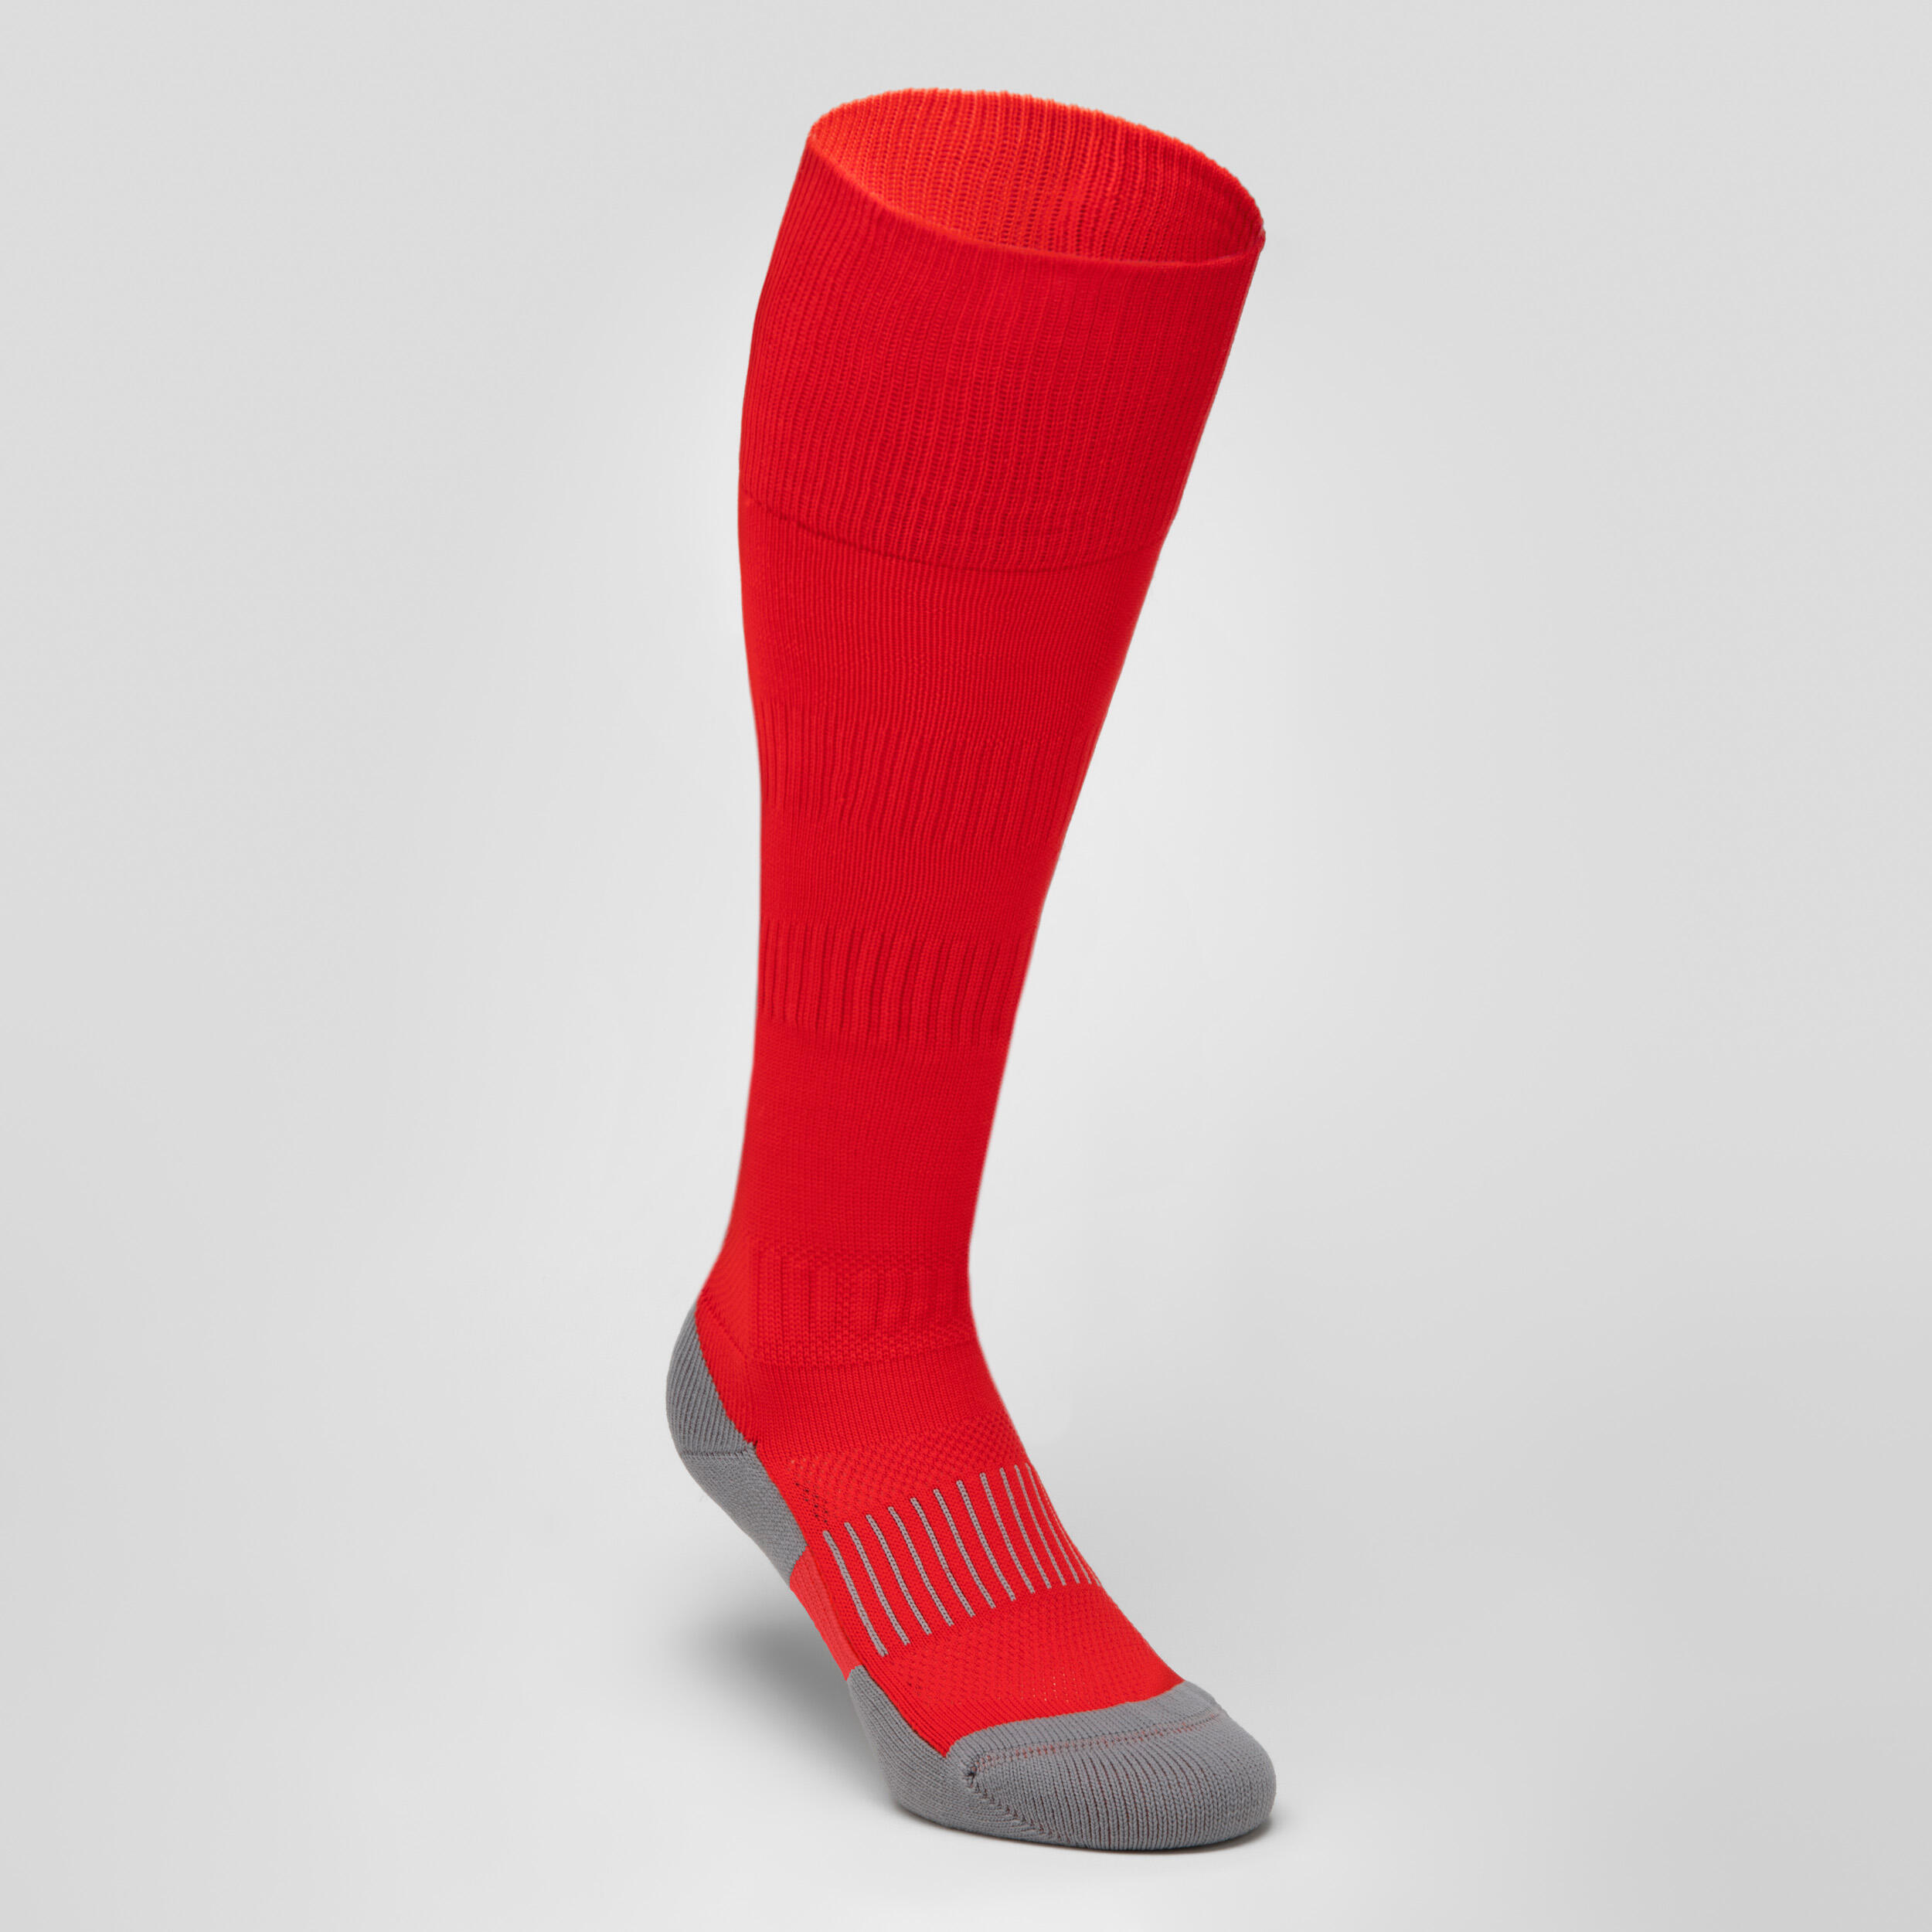 OFFLOAD Adult Knee-Length Rugby Socks R500 - Red